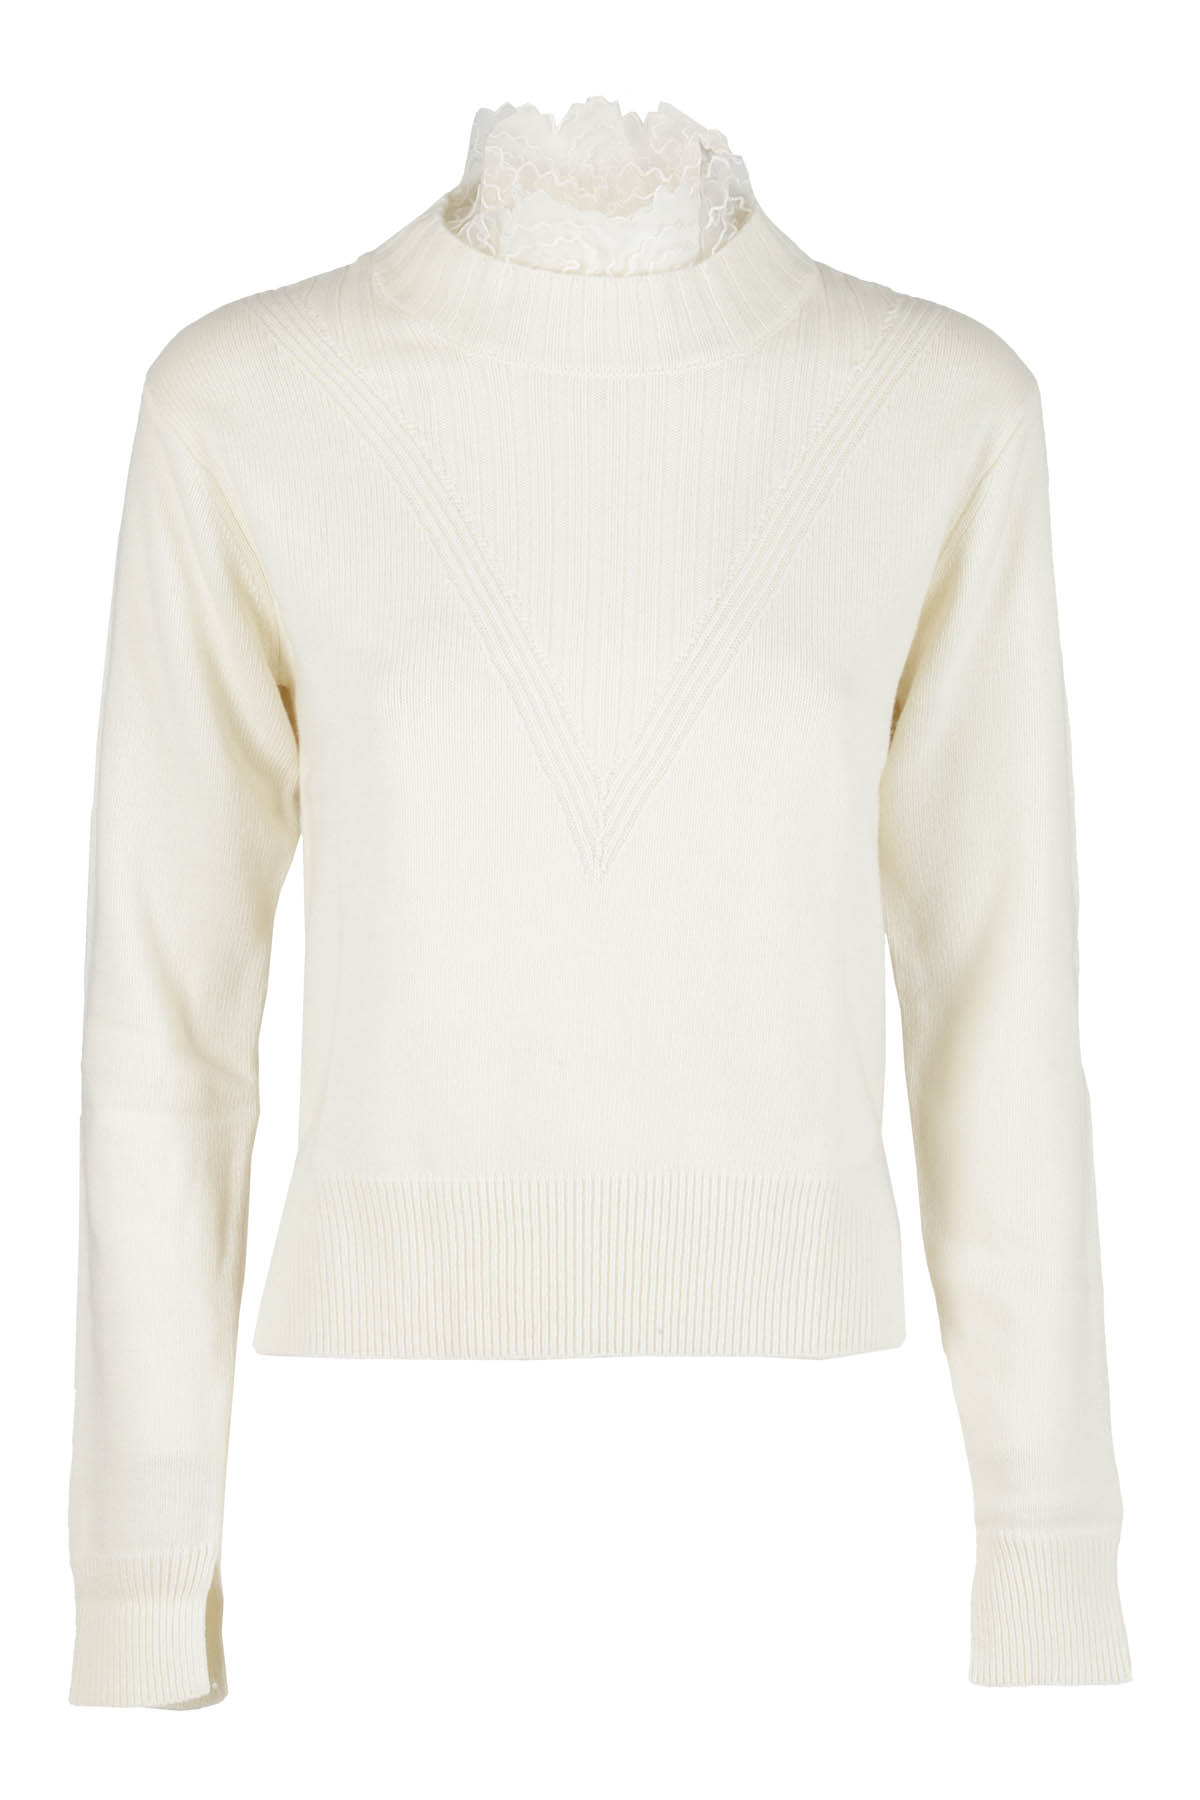 SEE BY CHLOÉ SWEATER